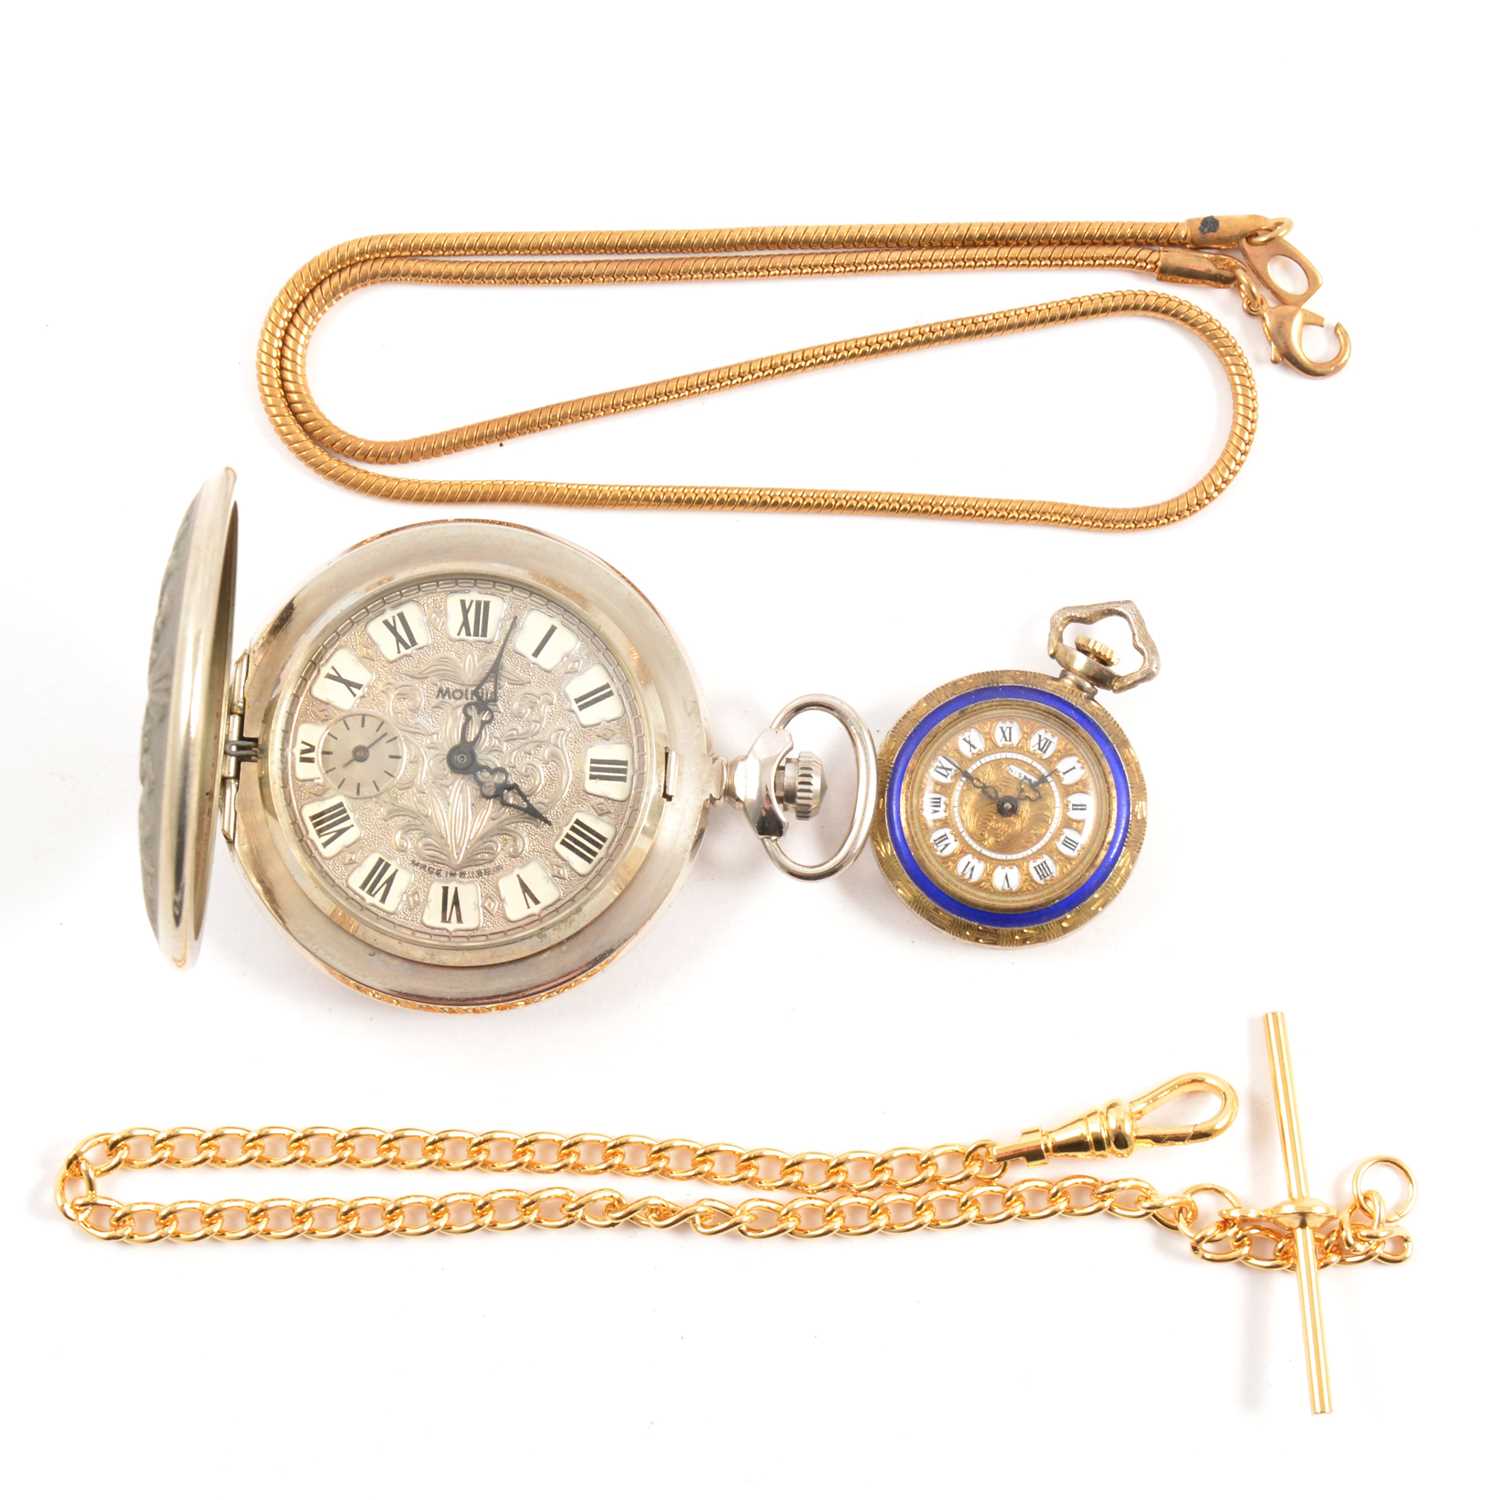 Lot 148 - An Italian gilt metal and enamel fob watch, modern pocket watch and two modern watch chains.